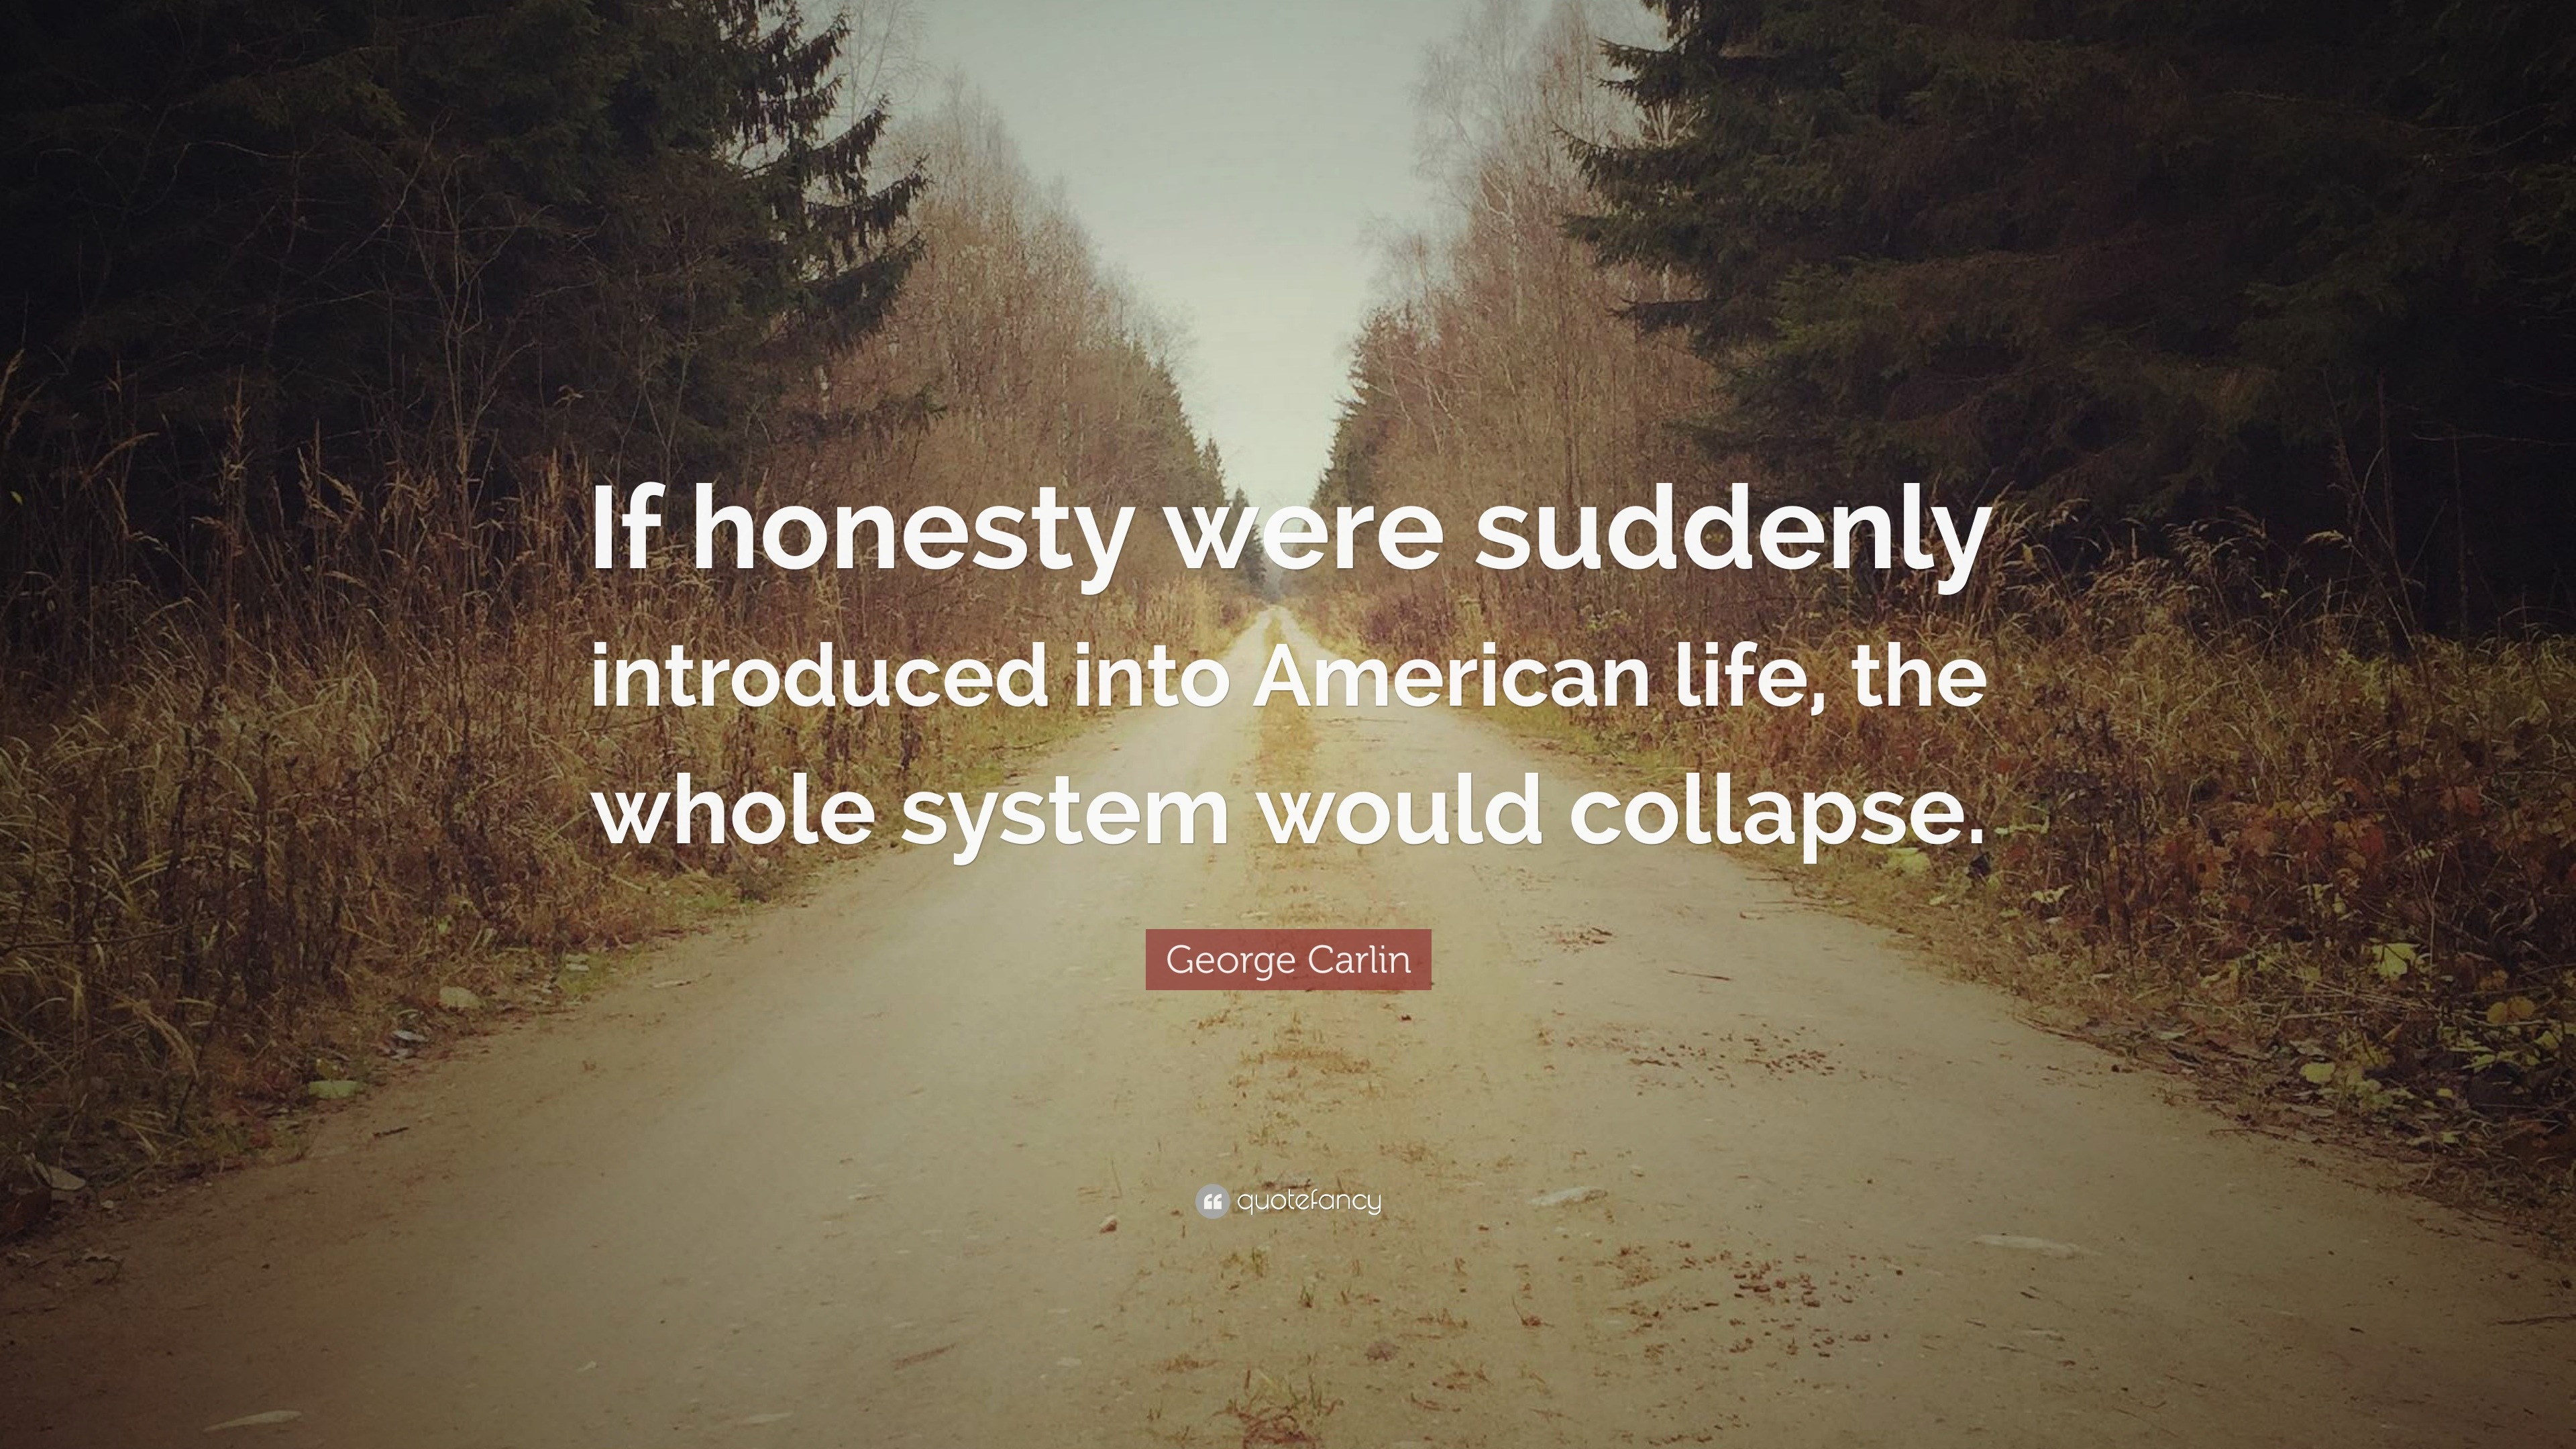 George Carlin Quote: “If honesty were suddenly introduced into American